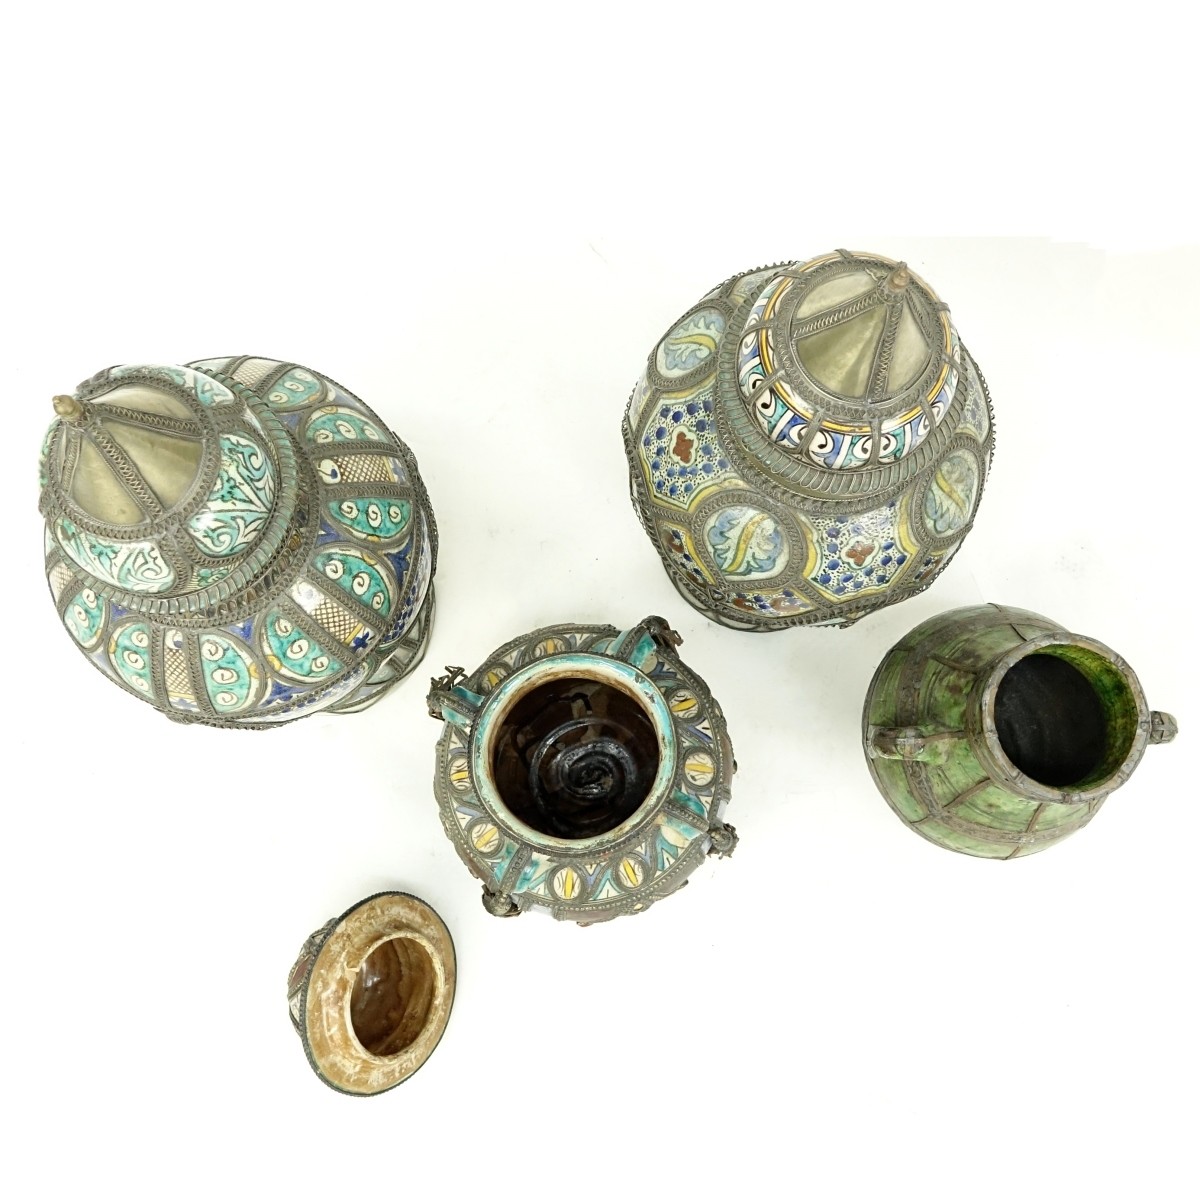 Grouping of Four (4) Moroccan Pottery Jars